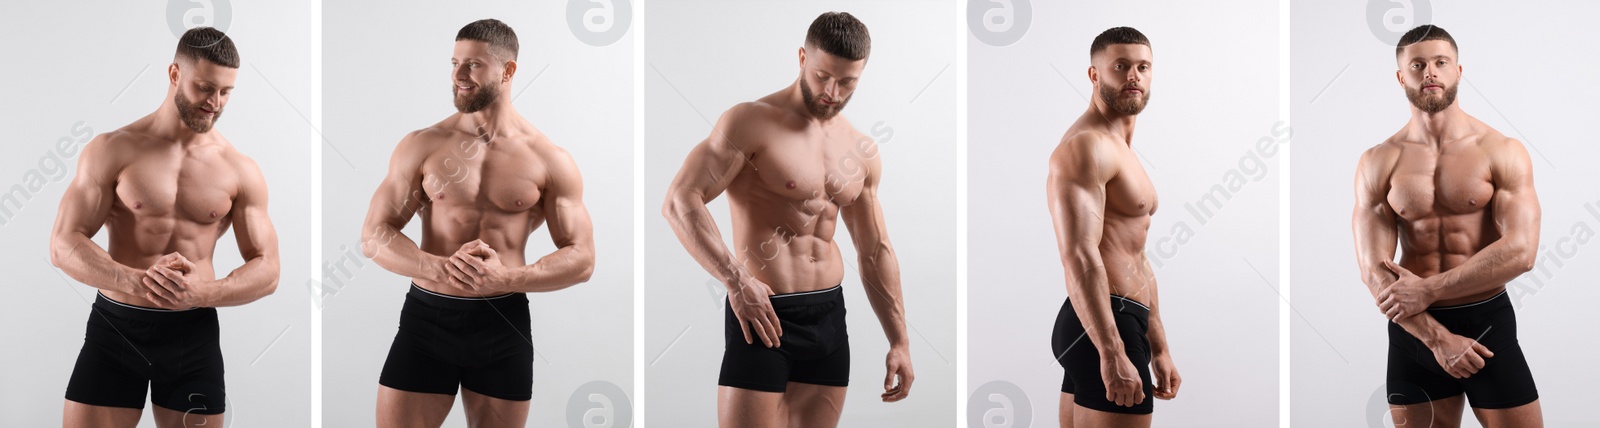 Image of Muscular man in stylish black underwear on white background, collection of photos